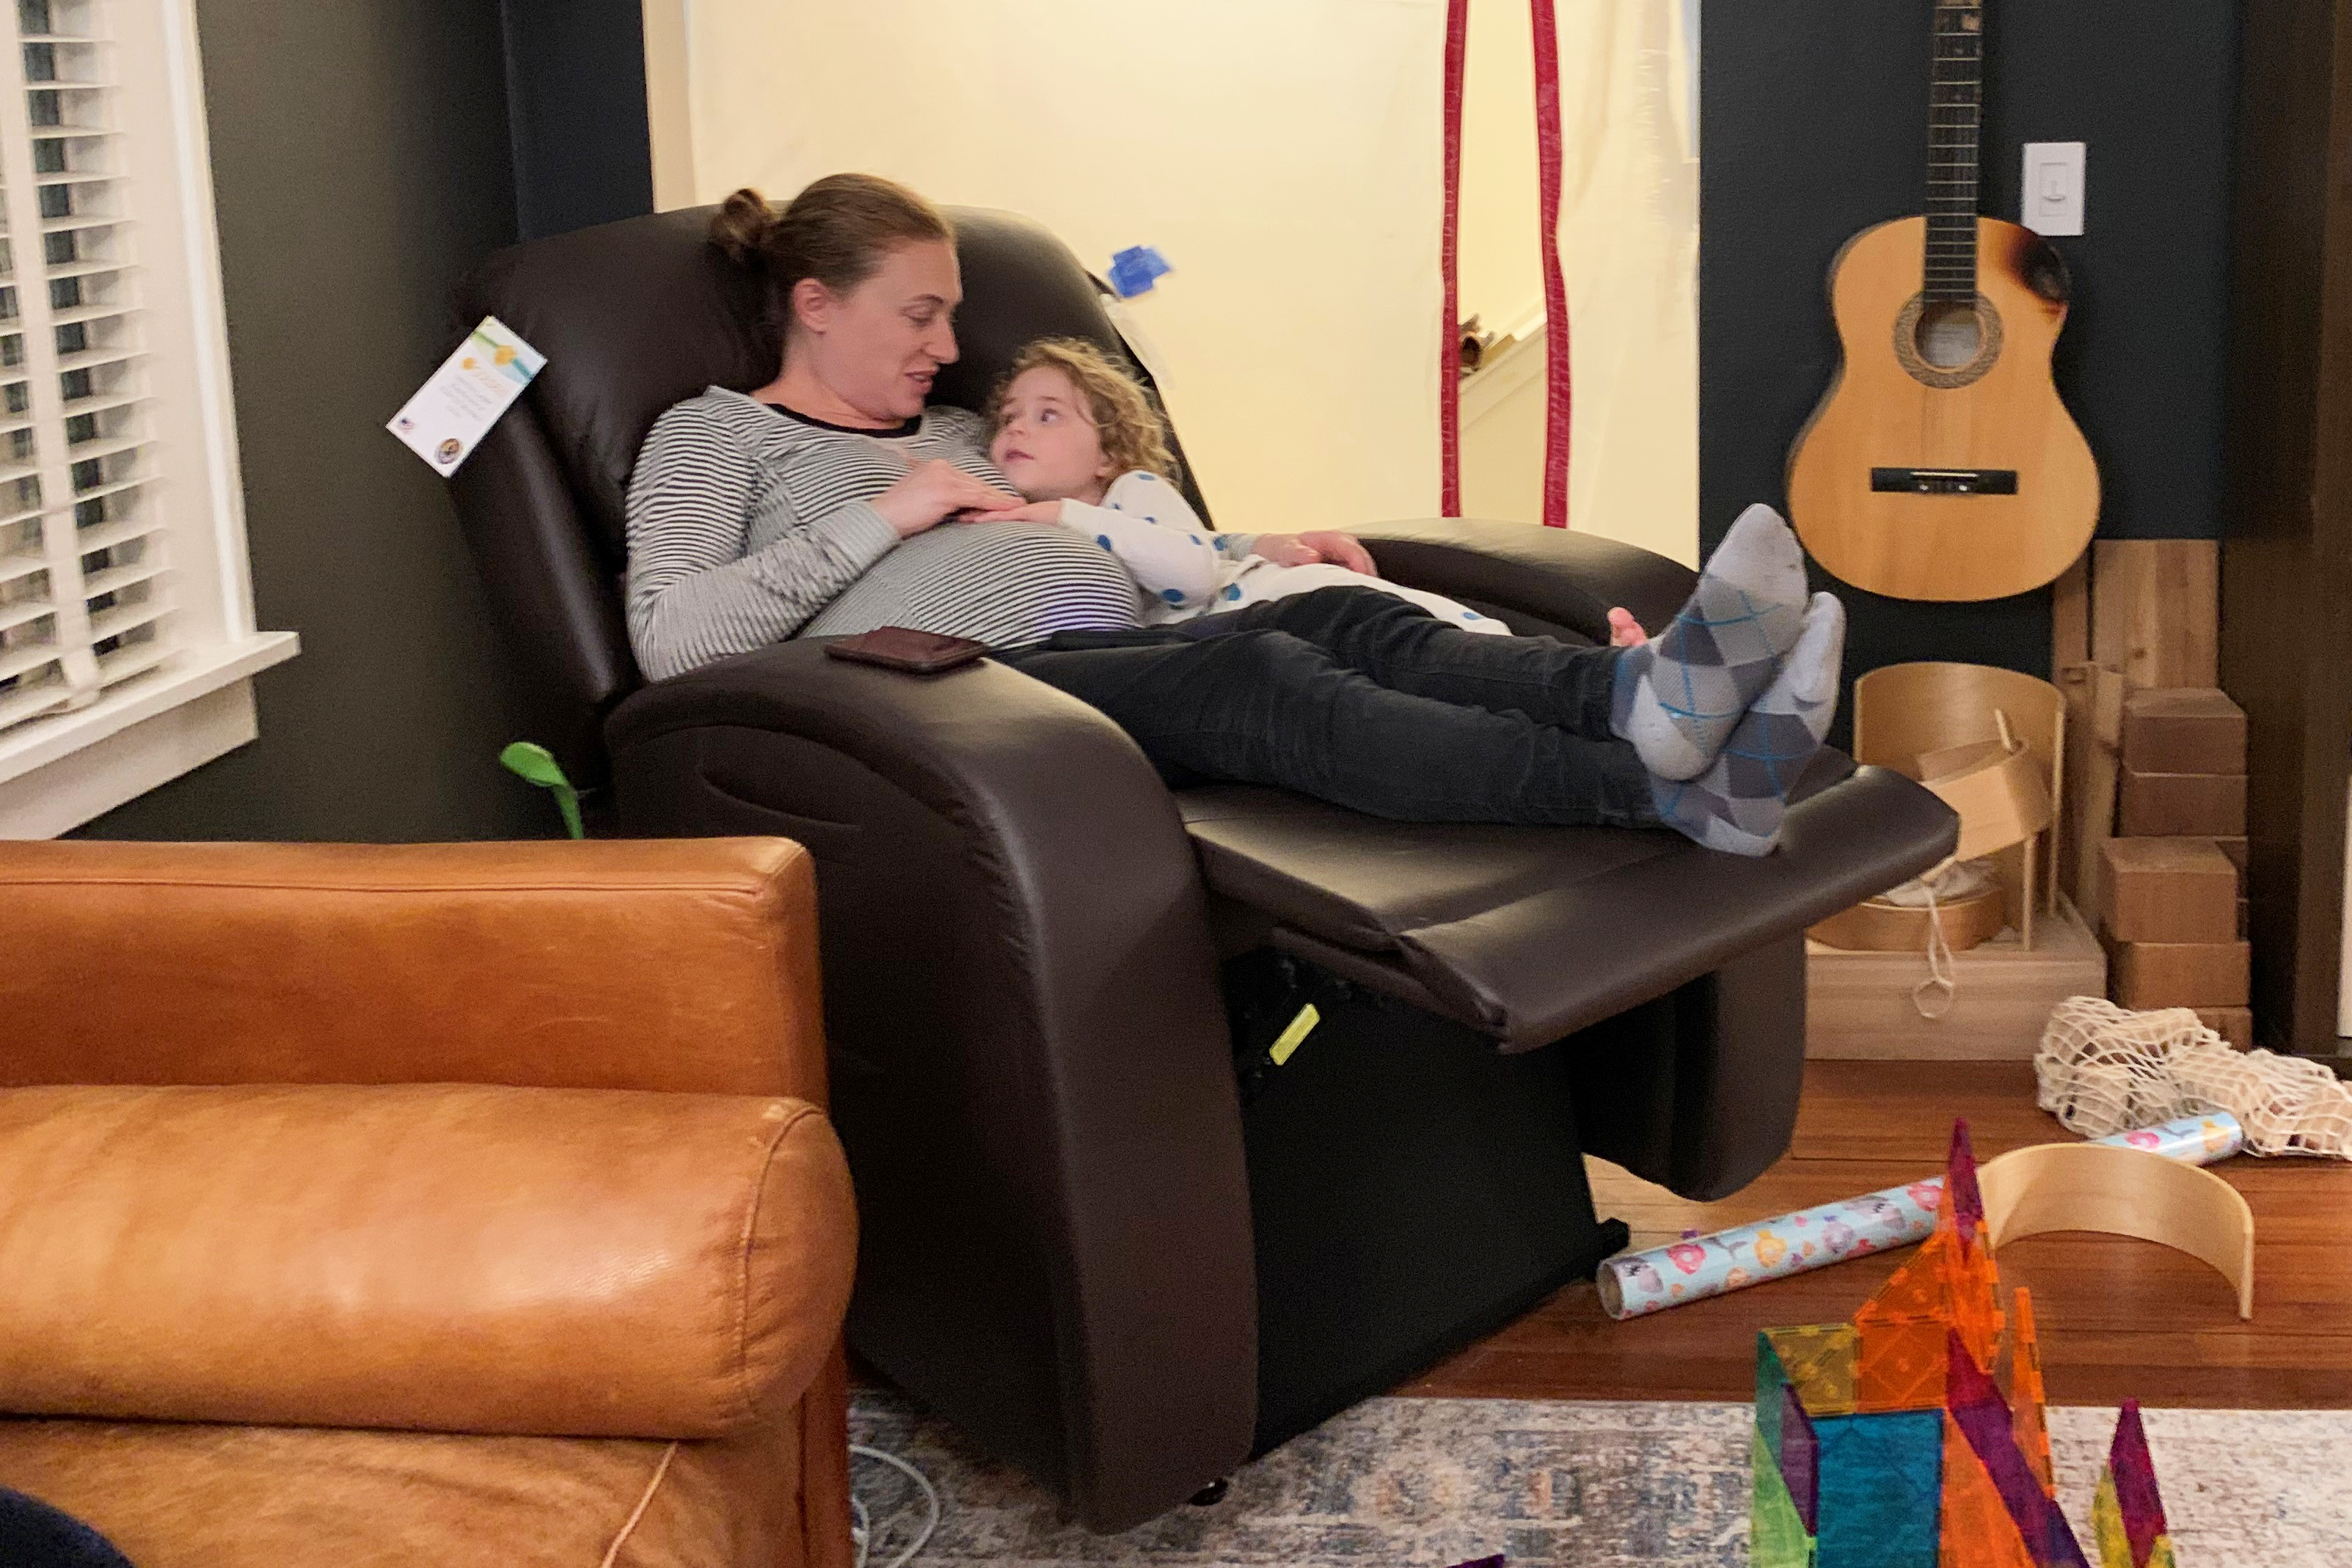 Golden Lift Recliners: The Perfect Maternity & Nursing Chair